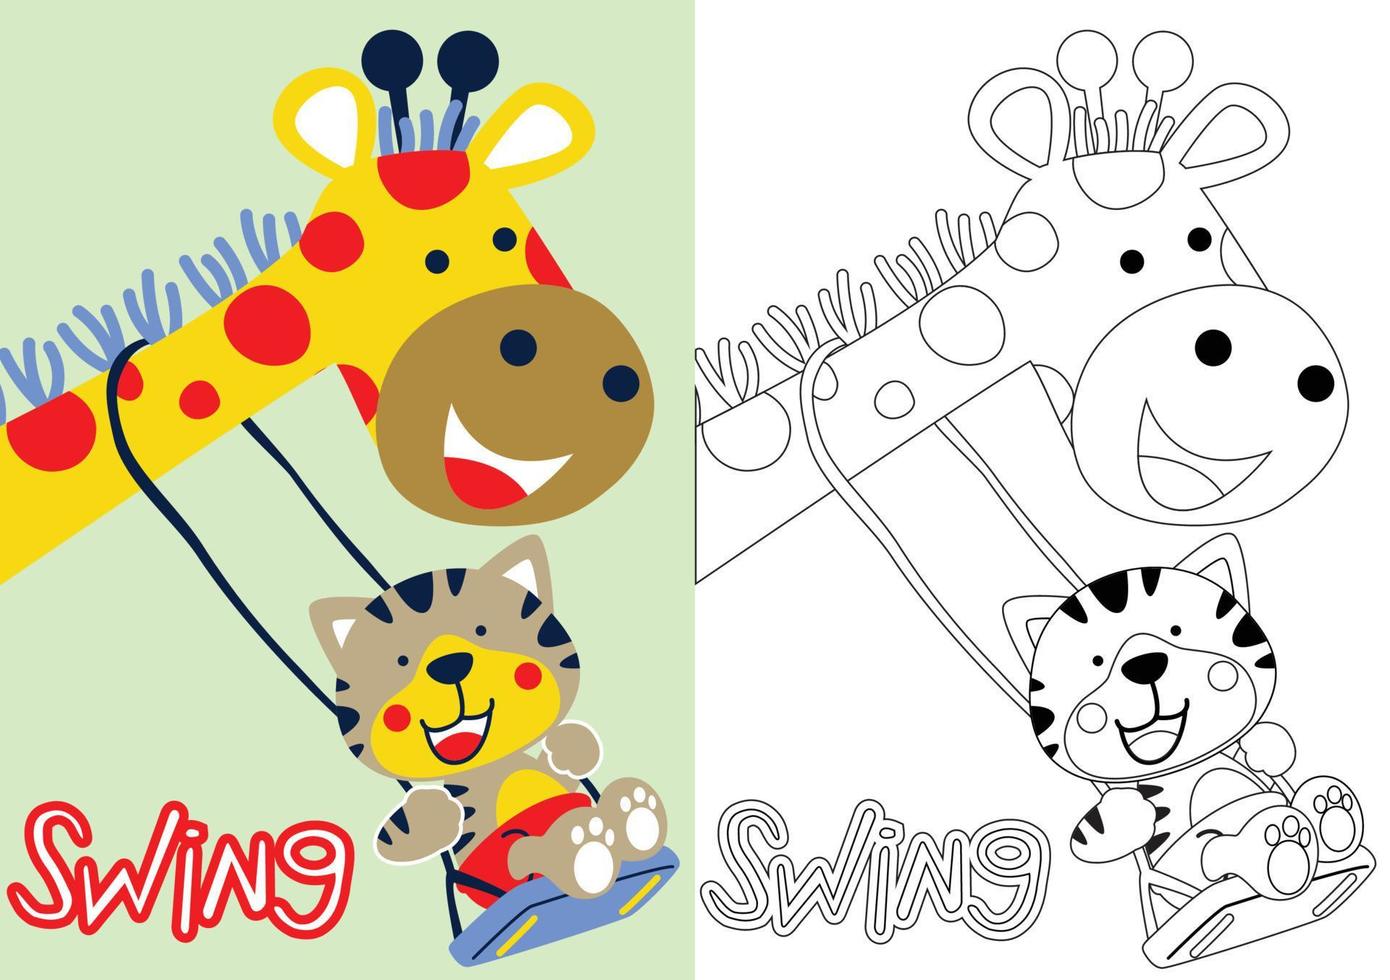 cartoon vector of giraffe and tiger playing swing, coloring book or page